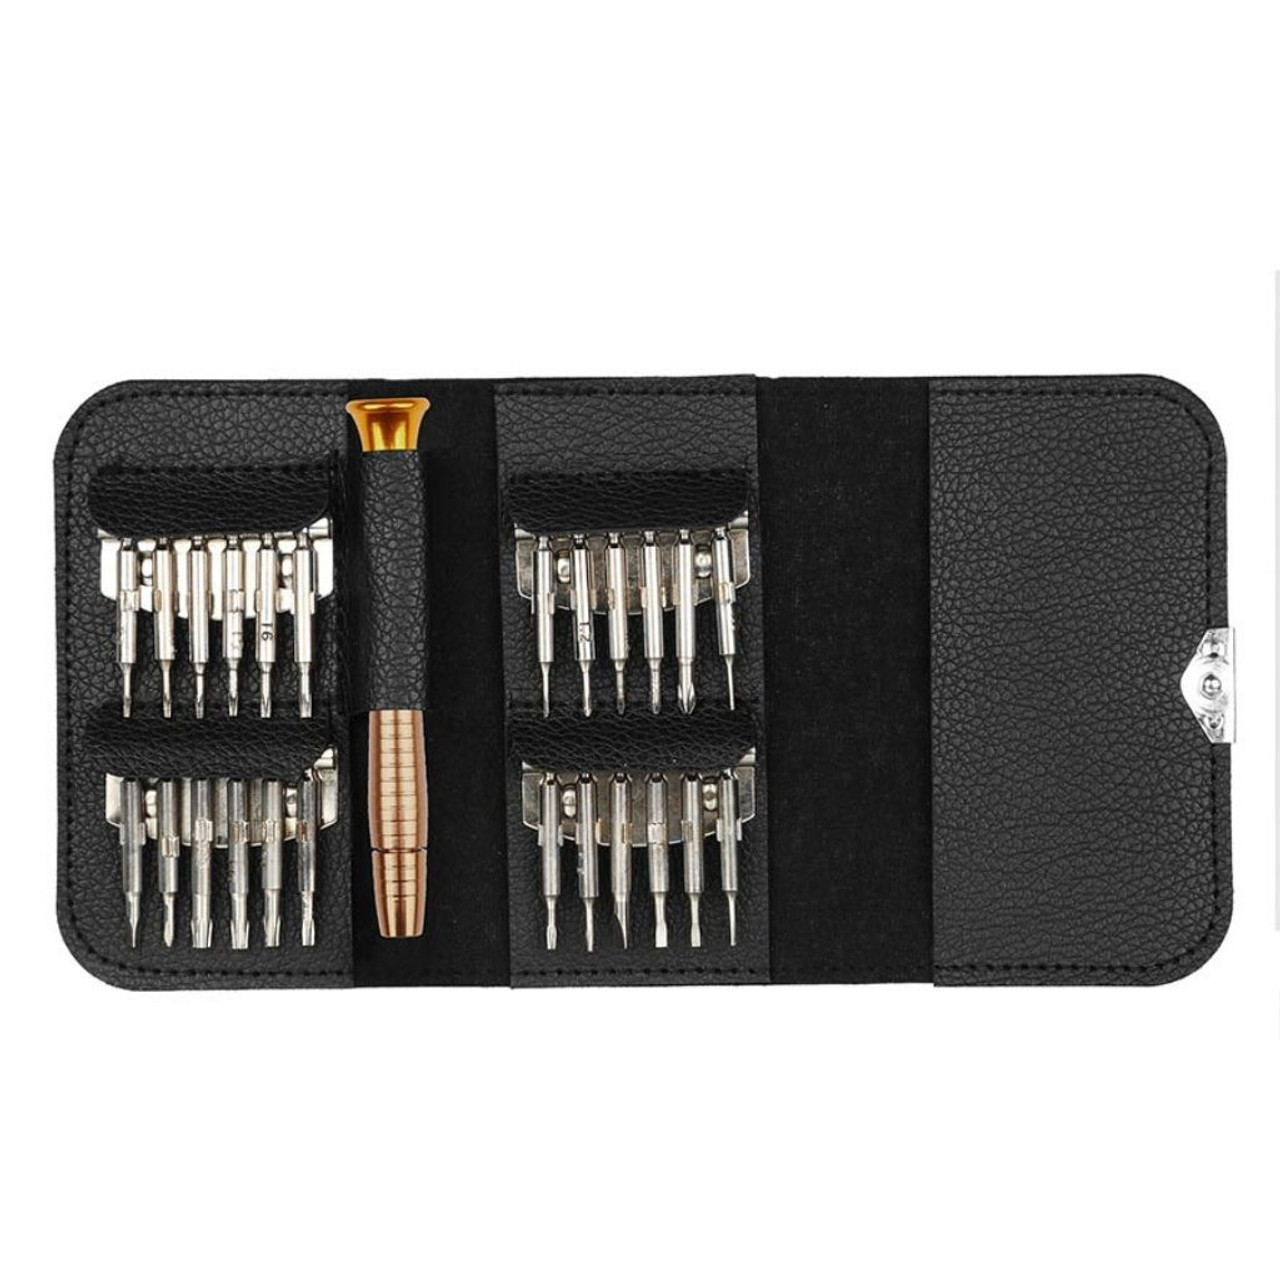 25-in-1 Multipurpose Precision Screwdriver Kit with Storage Case product image